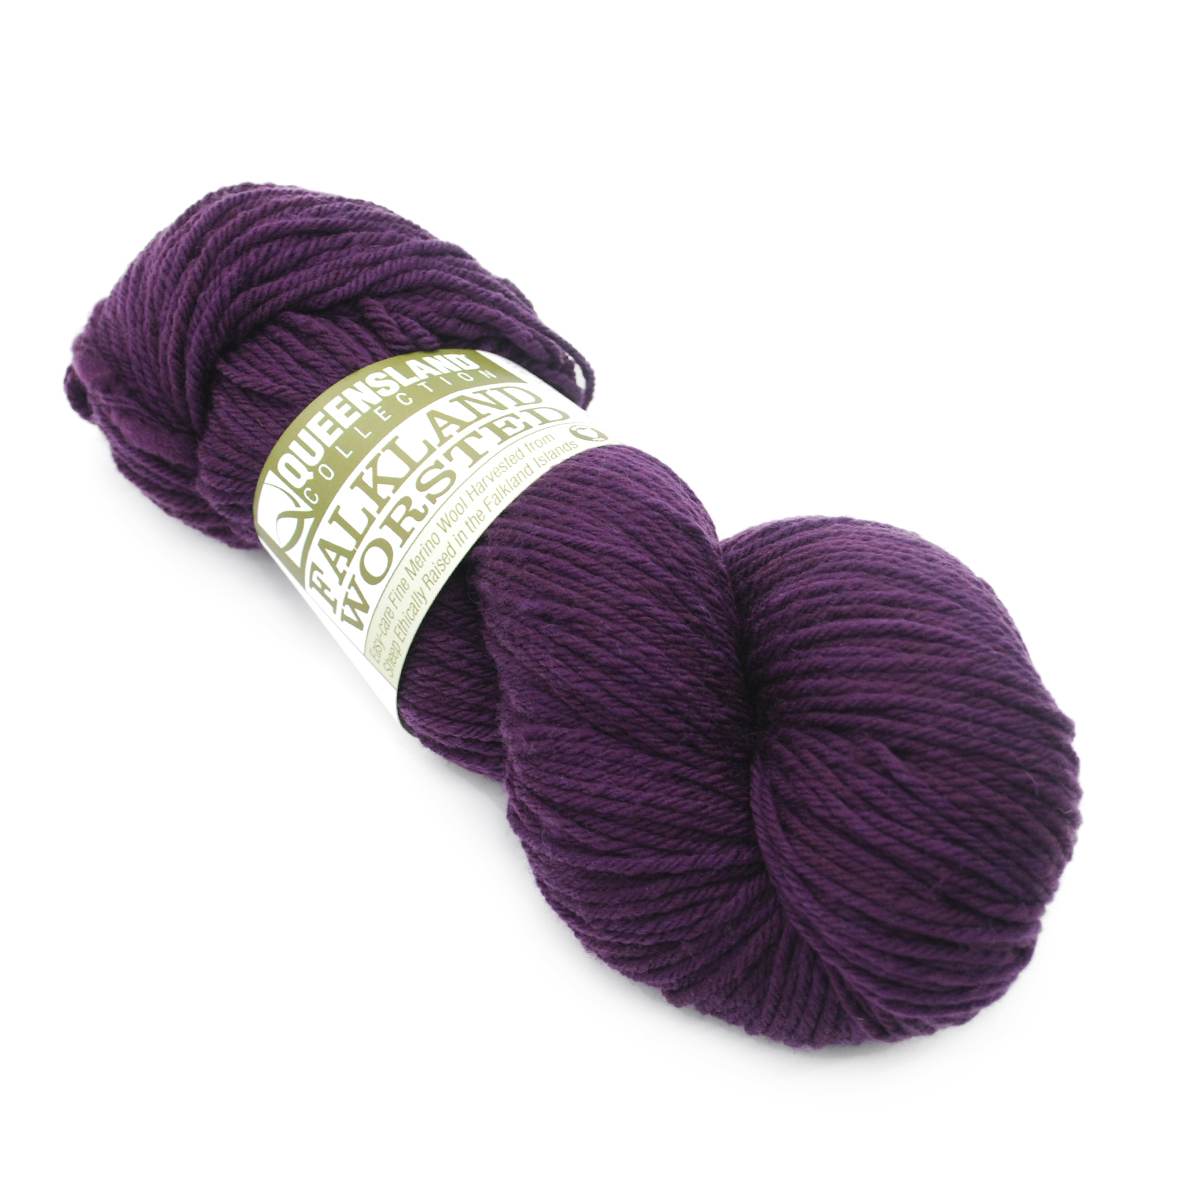 a skein of Falkland Worsted